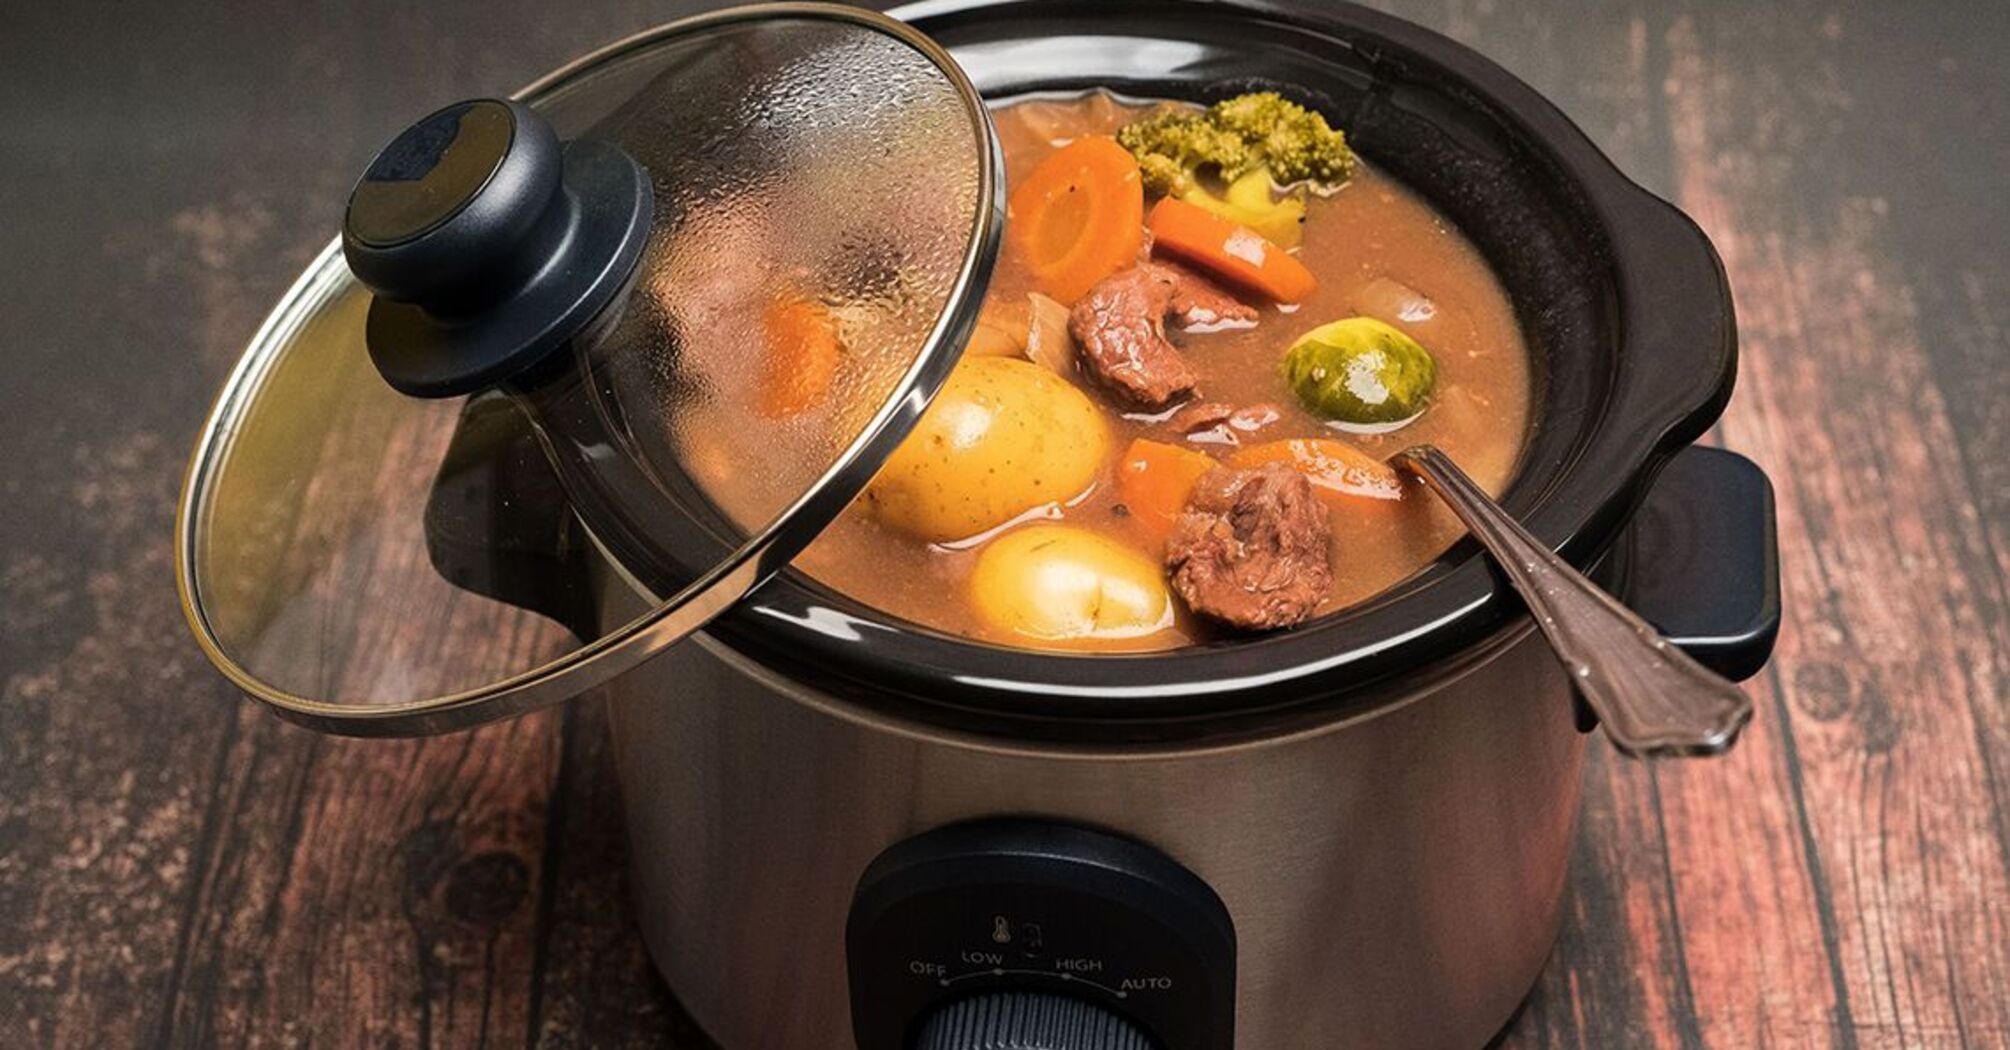 What not to cook in your slow cooker to avoid spoiling